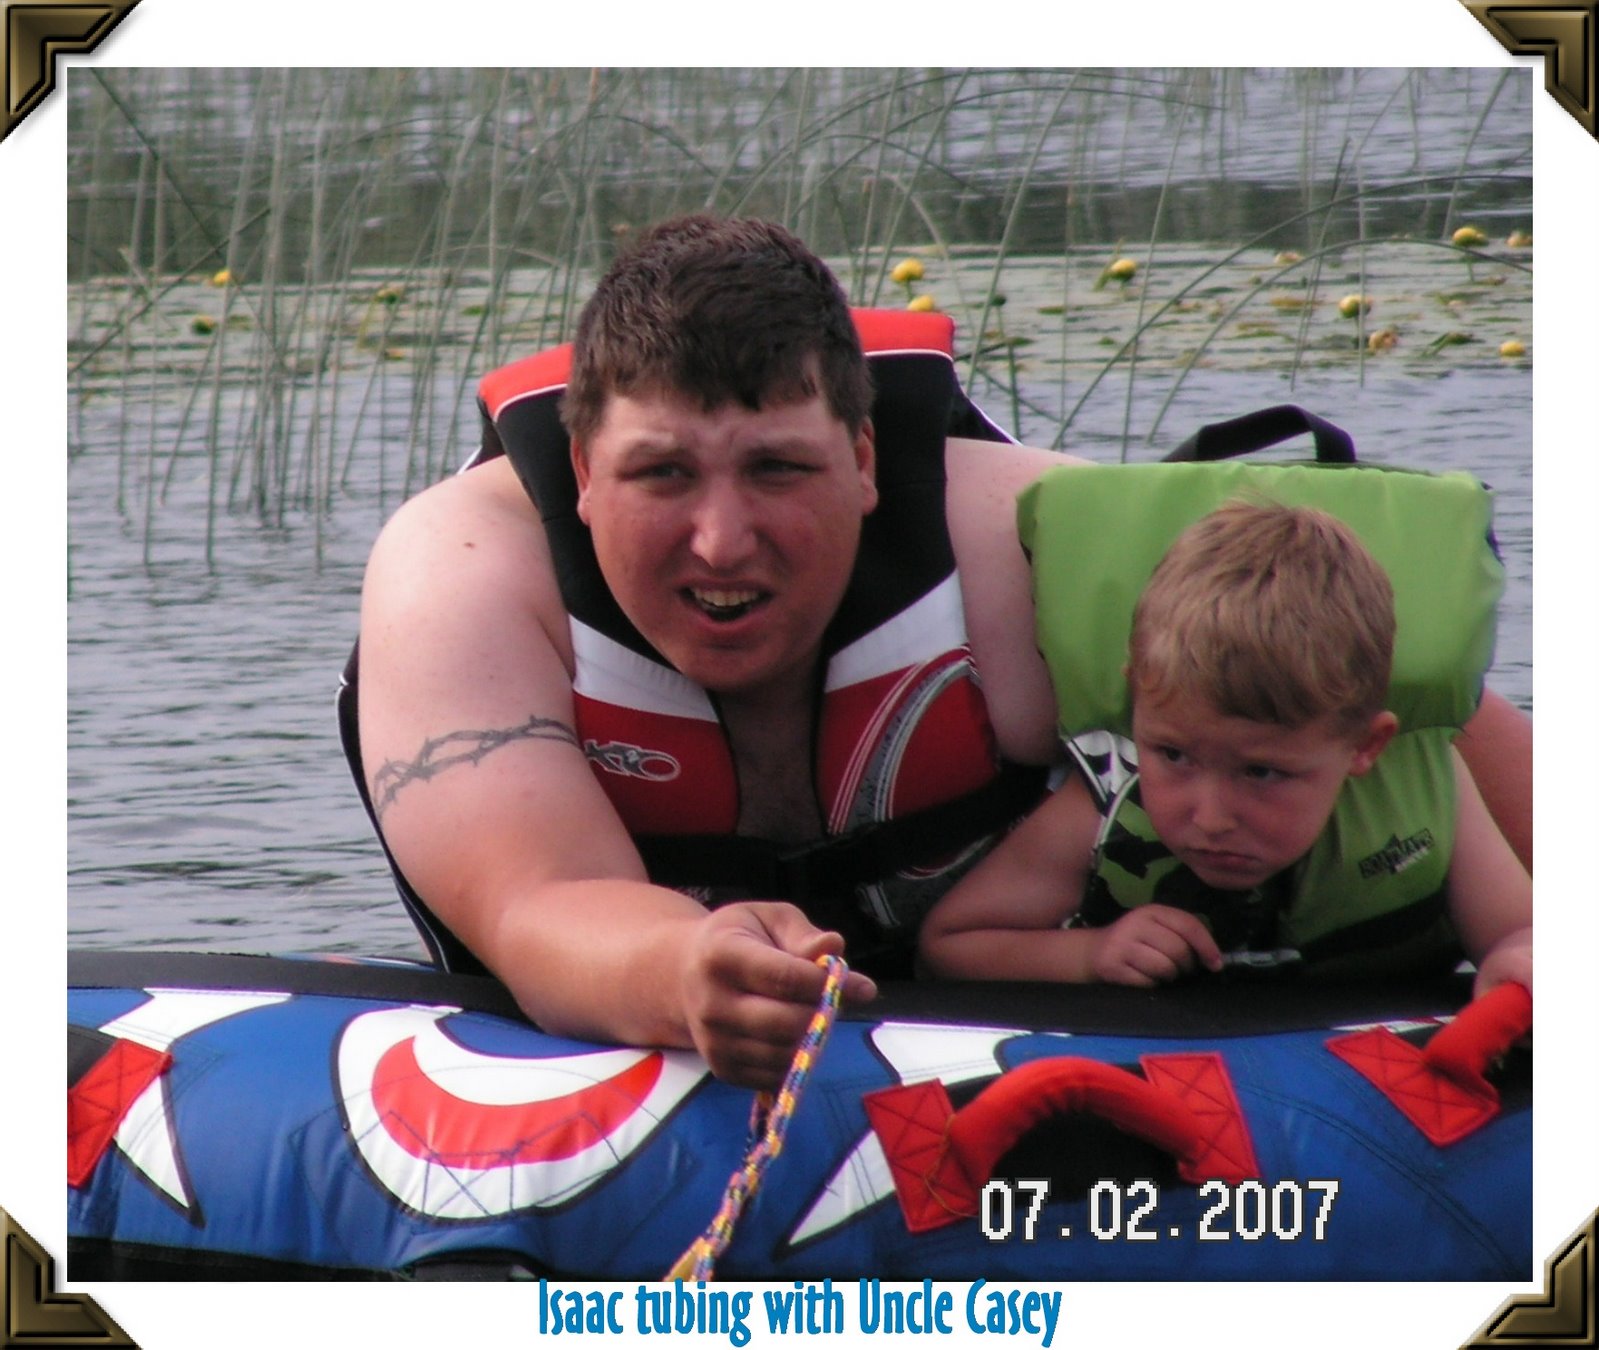 [Isaac+tubing+with+uncle+casey.jpg]